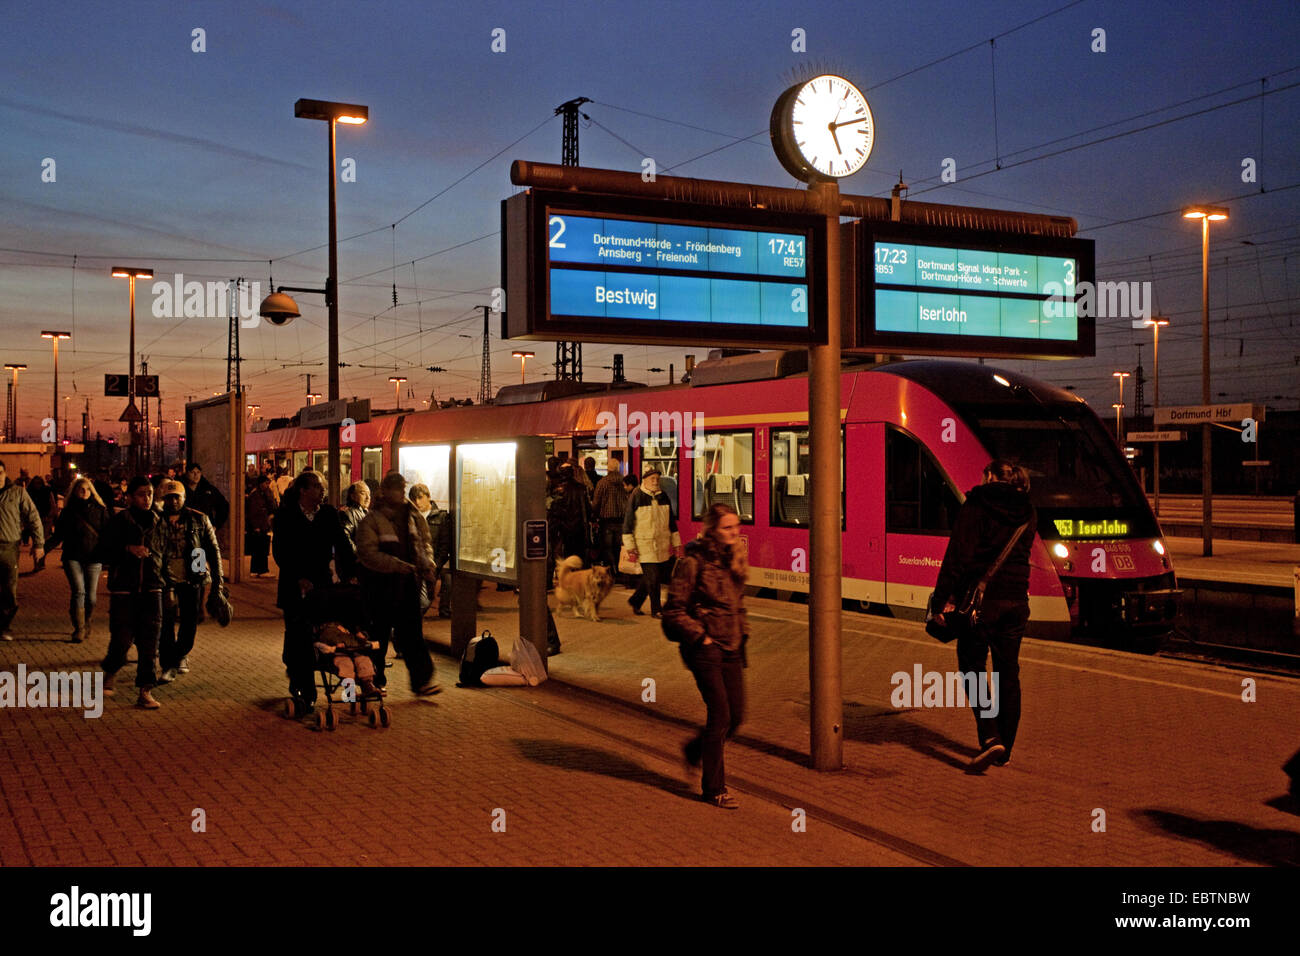 pedestrians in front of commuter train at central station in evening light, Germany, North Rhine-Westphalia, Ruhr Area, Dortmund Stock Photo